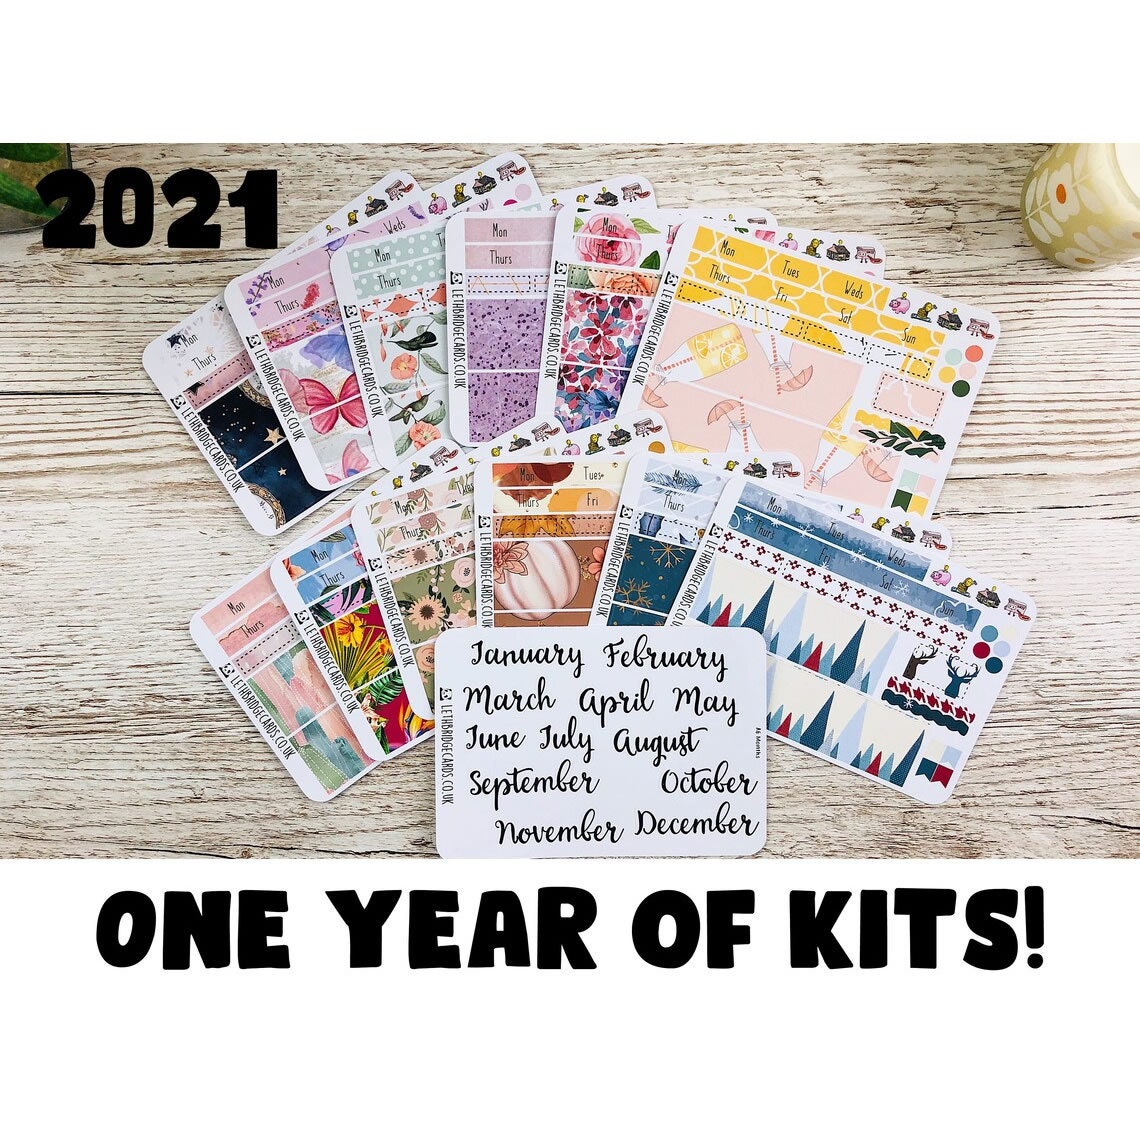 2024 Hobonichi Cousin Year at a Glance / Yearly View Stickers Bobo Pink 